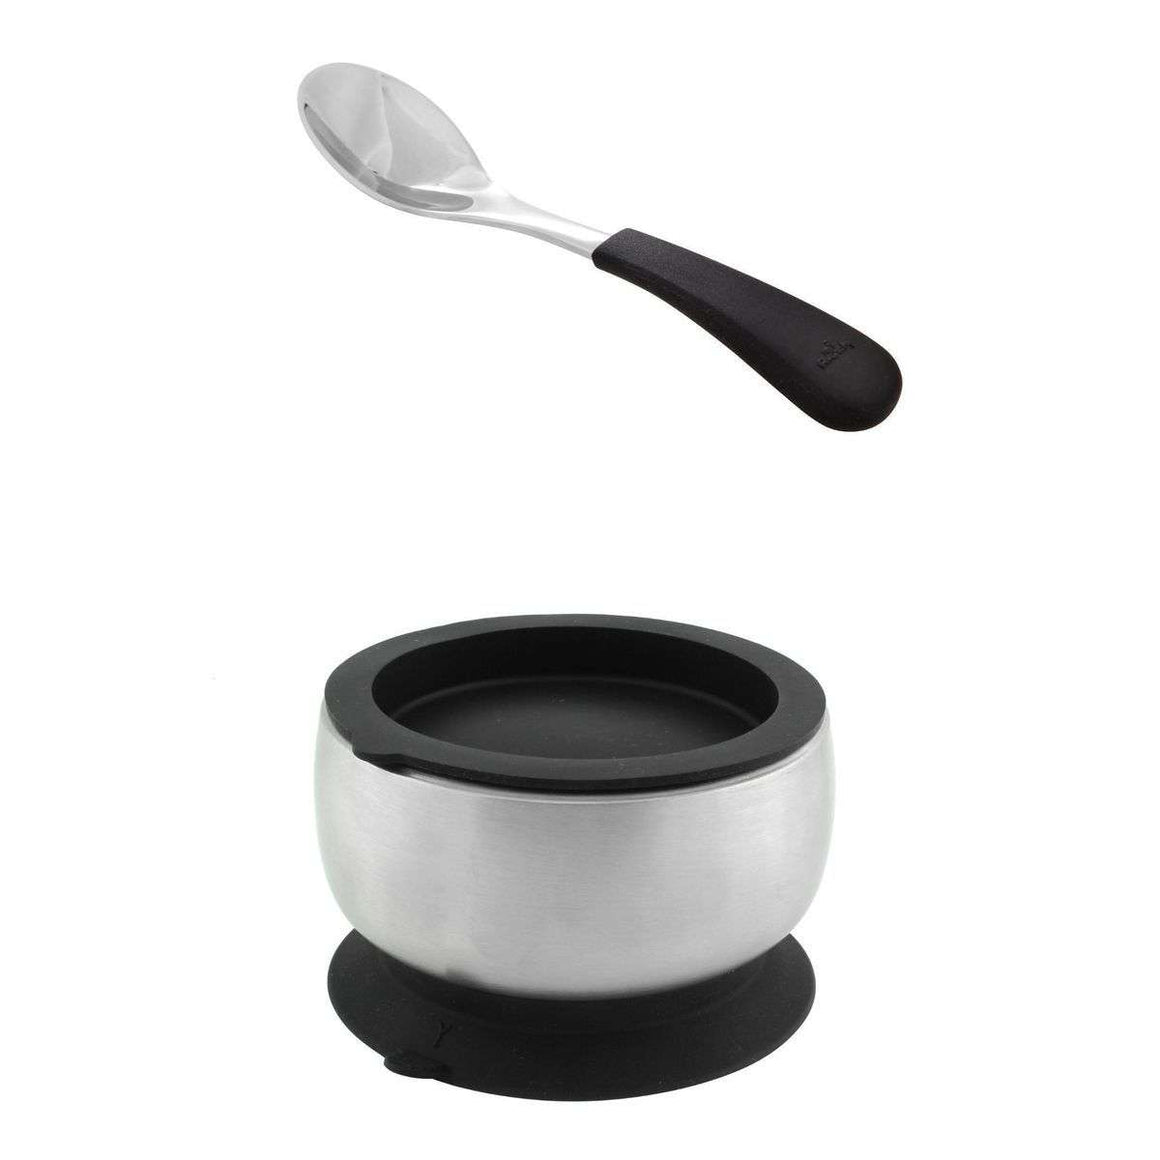 https://shopblossum.com/cdn/shop/products/black-avanchy-stainless-steel-baby-bowl-with-spoon-combo-air-tight-lid-avanchy-sustainable-baby-dishware-5_1200x_92a7b6c8-23b6-4396-88a7-e08d10043c70_580x@2x.jpg?v=1552264453